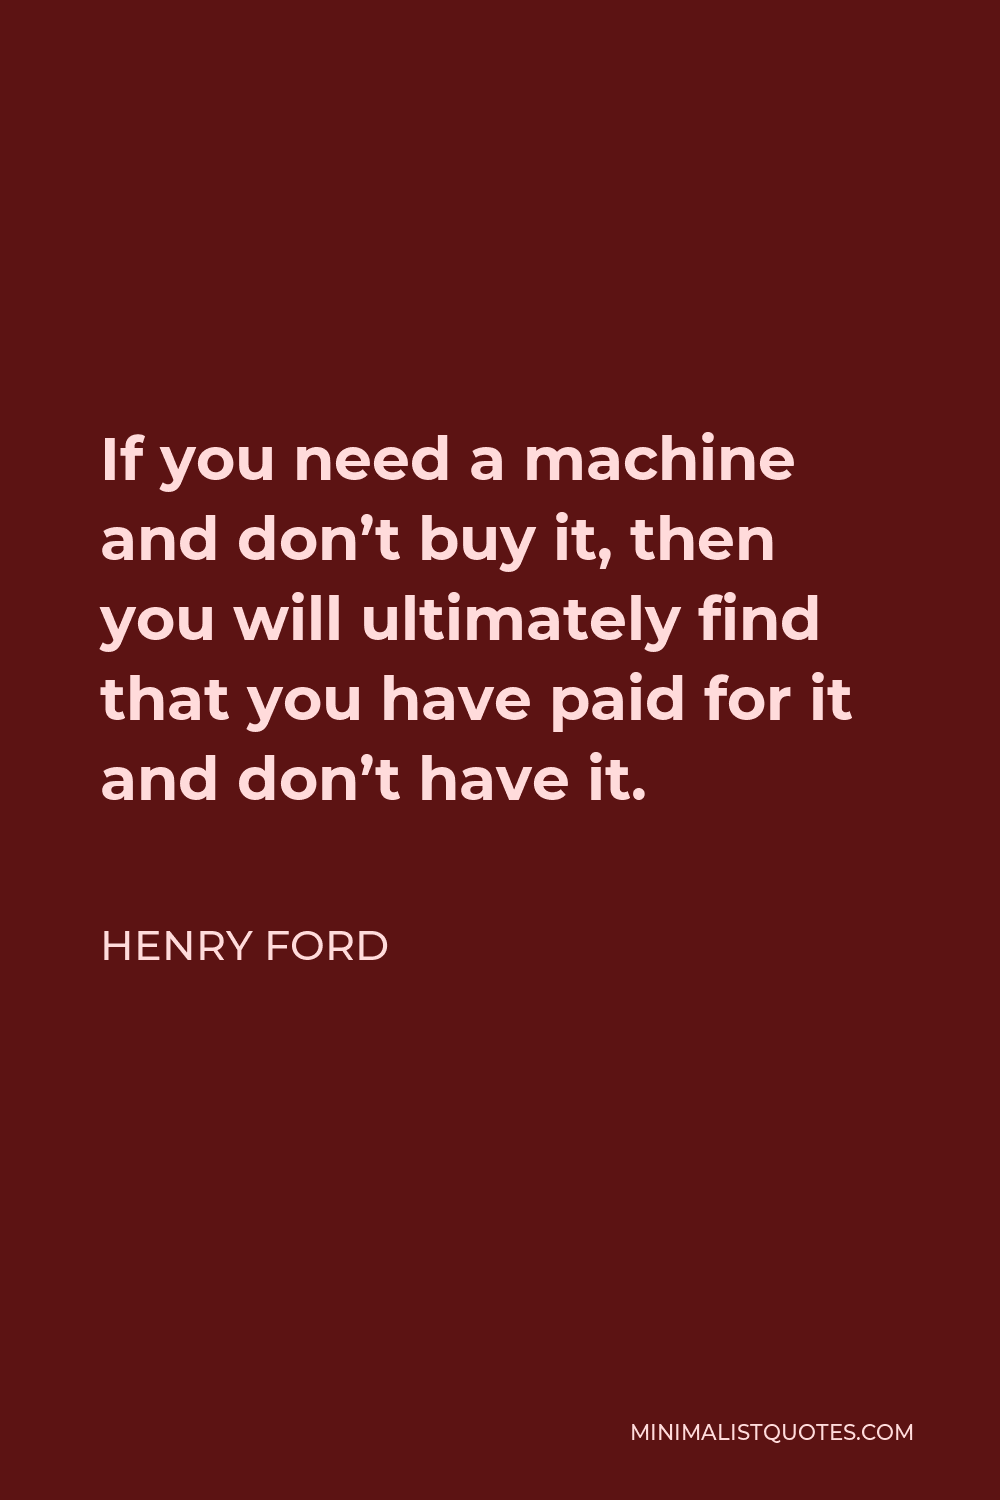 Henry Ford Quote - If you need a machine and don’t buy it, then you will ultimately find that you have paid for it and don’t have it.